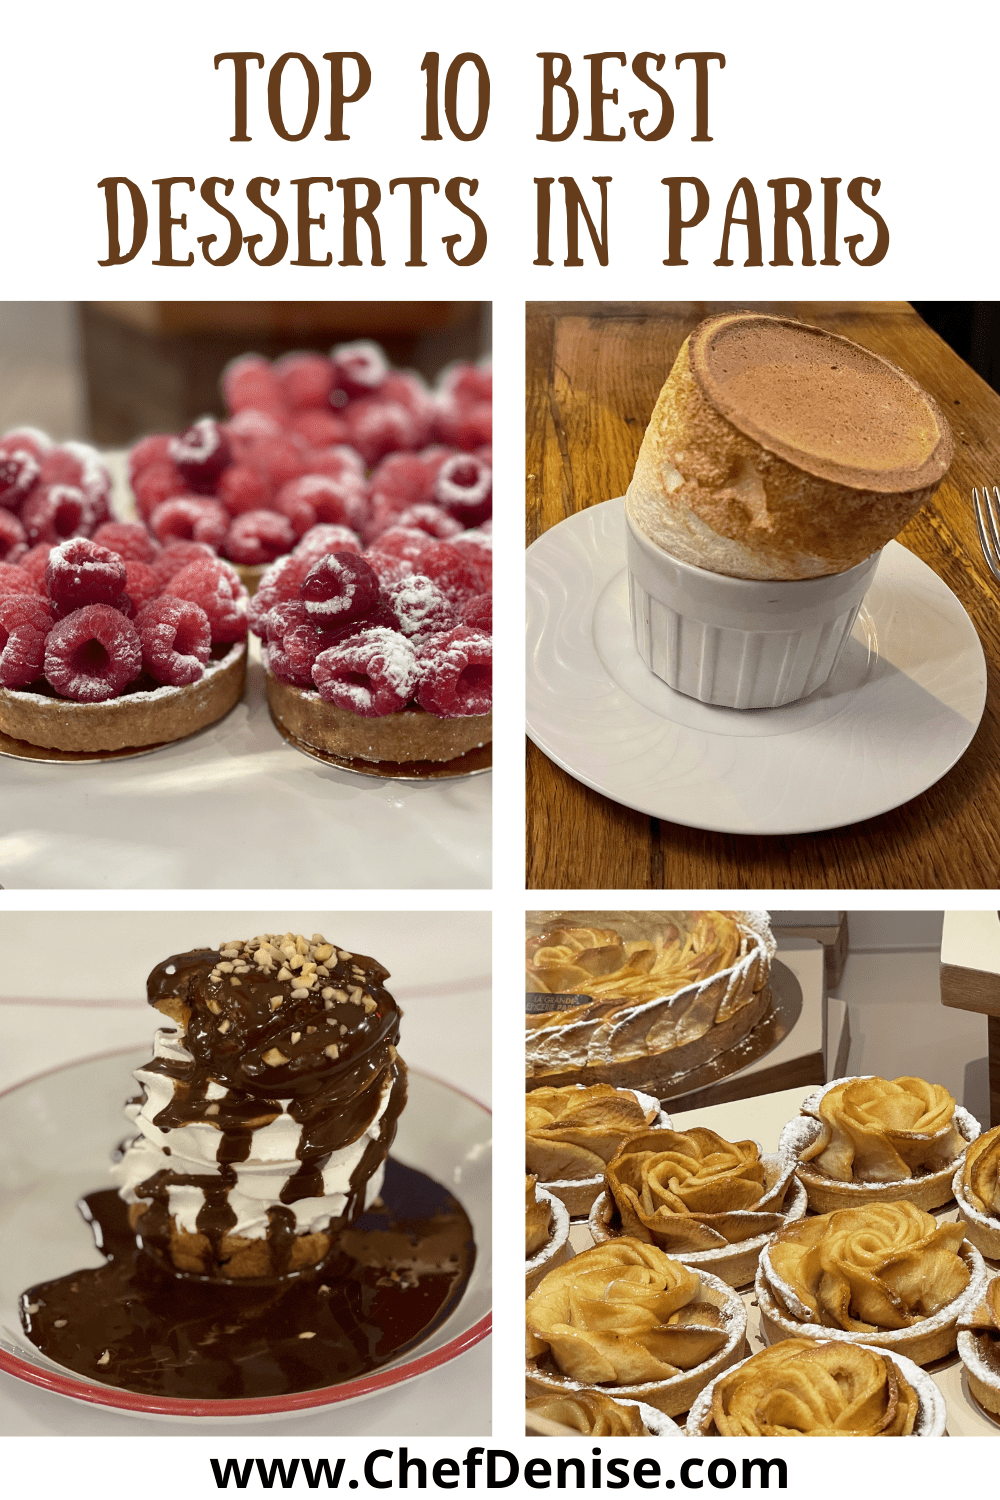 Pin for Top 10 Desserts in Paris